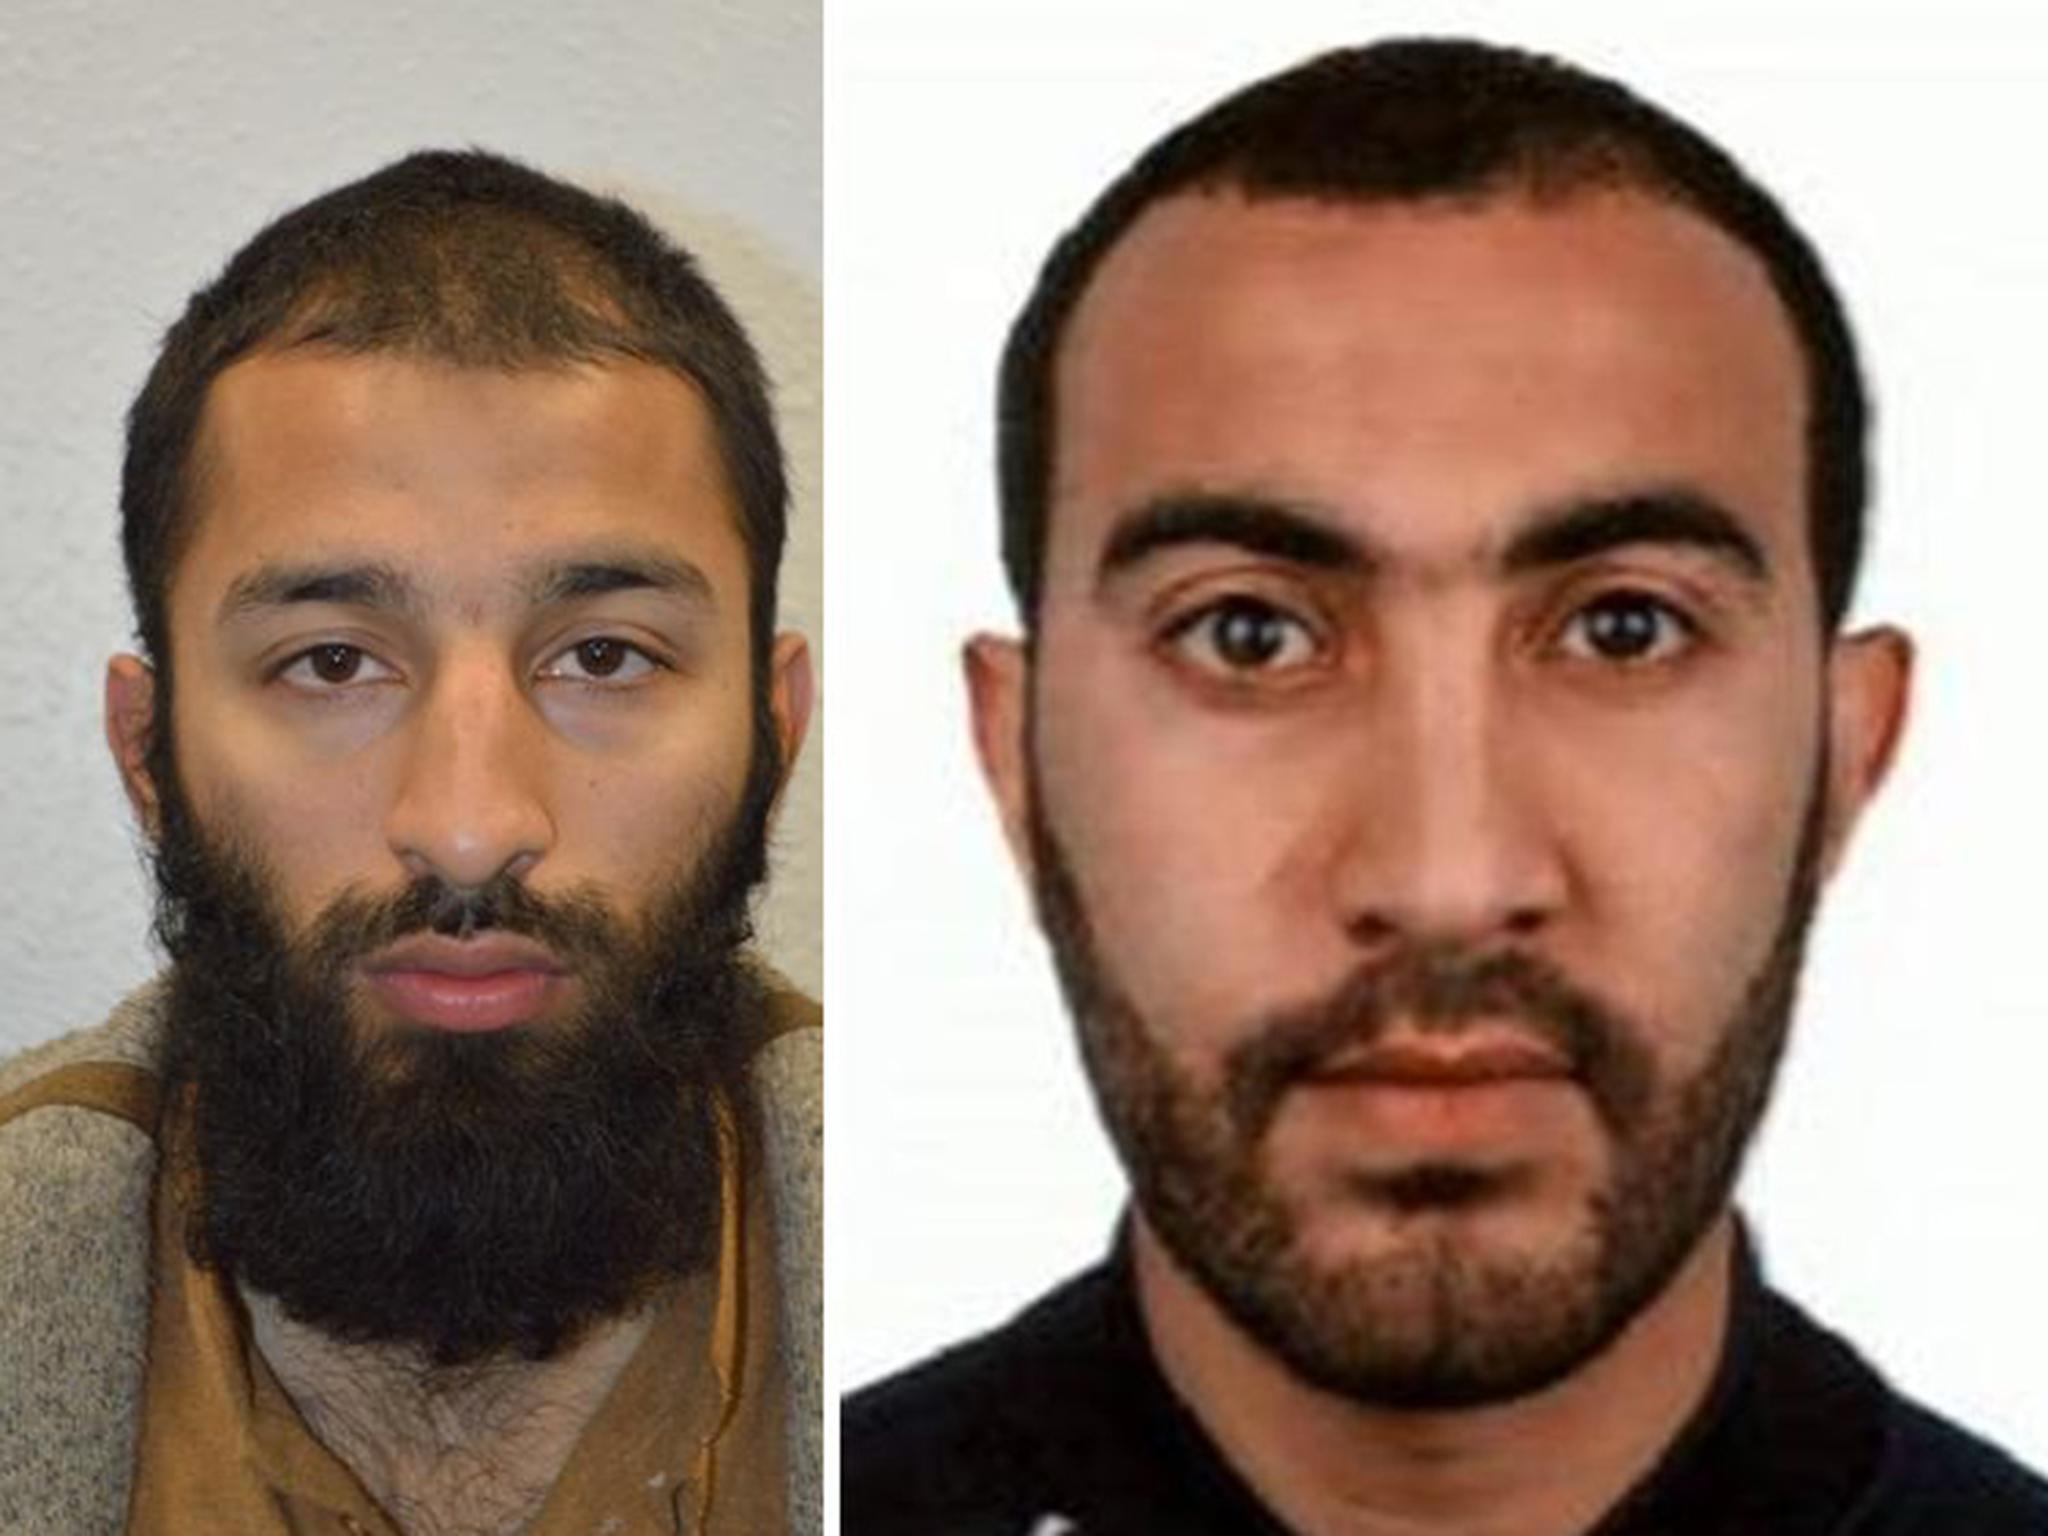 Khuram Shazad Butt, left, and Rachid Redouane, who were shot dead by police after the London Bridge terror attack